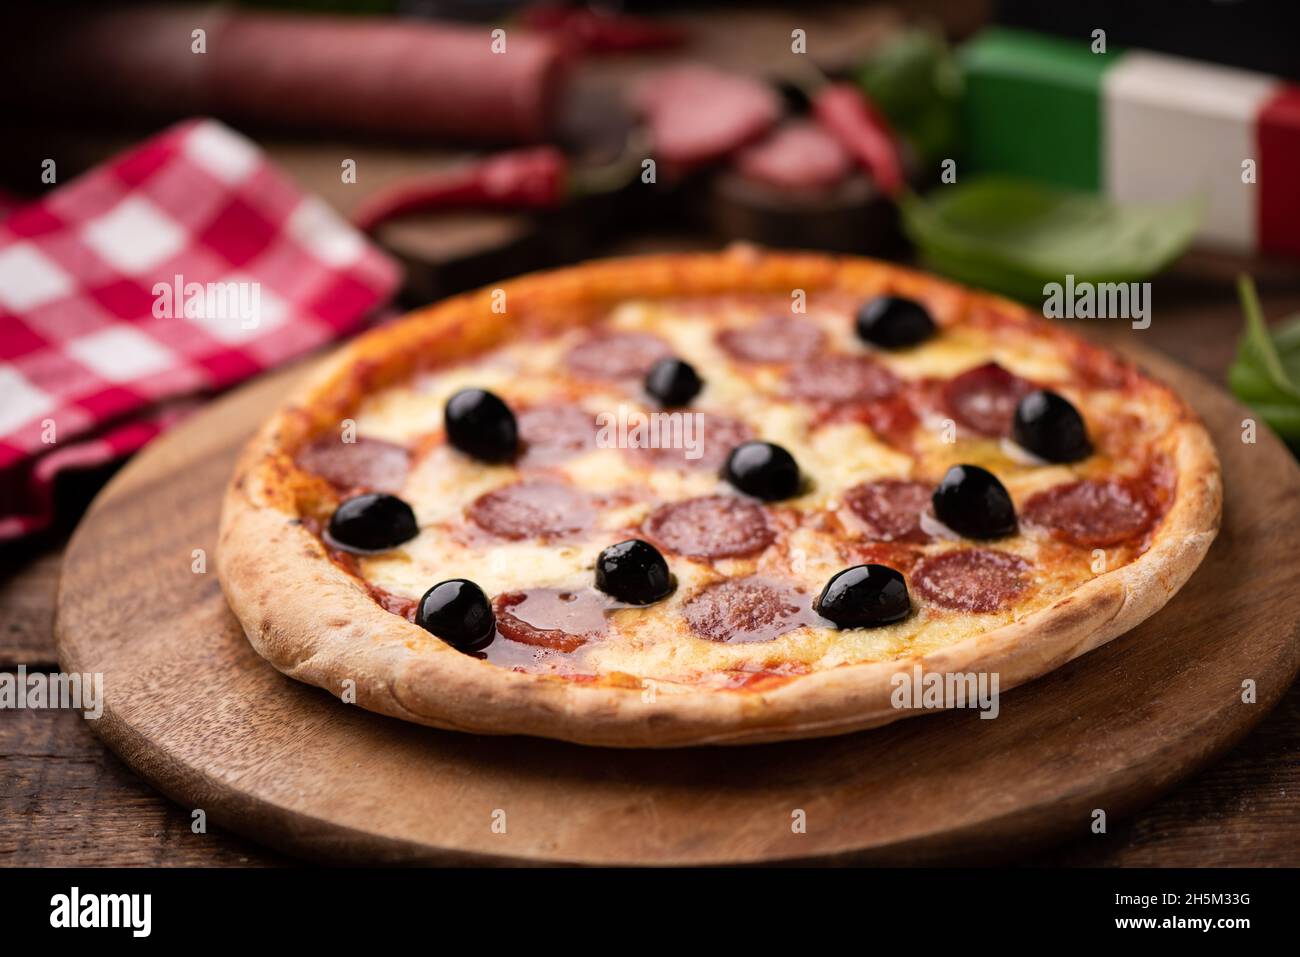 Pizza slice with olives and salami toping on wooden table close up Stock Photo